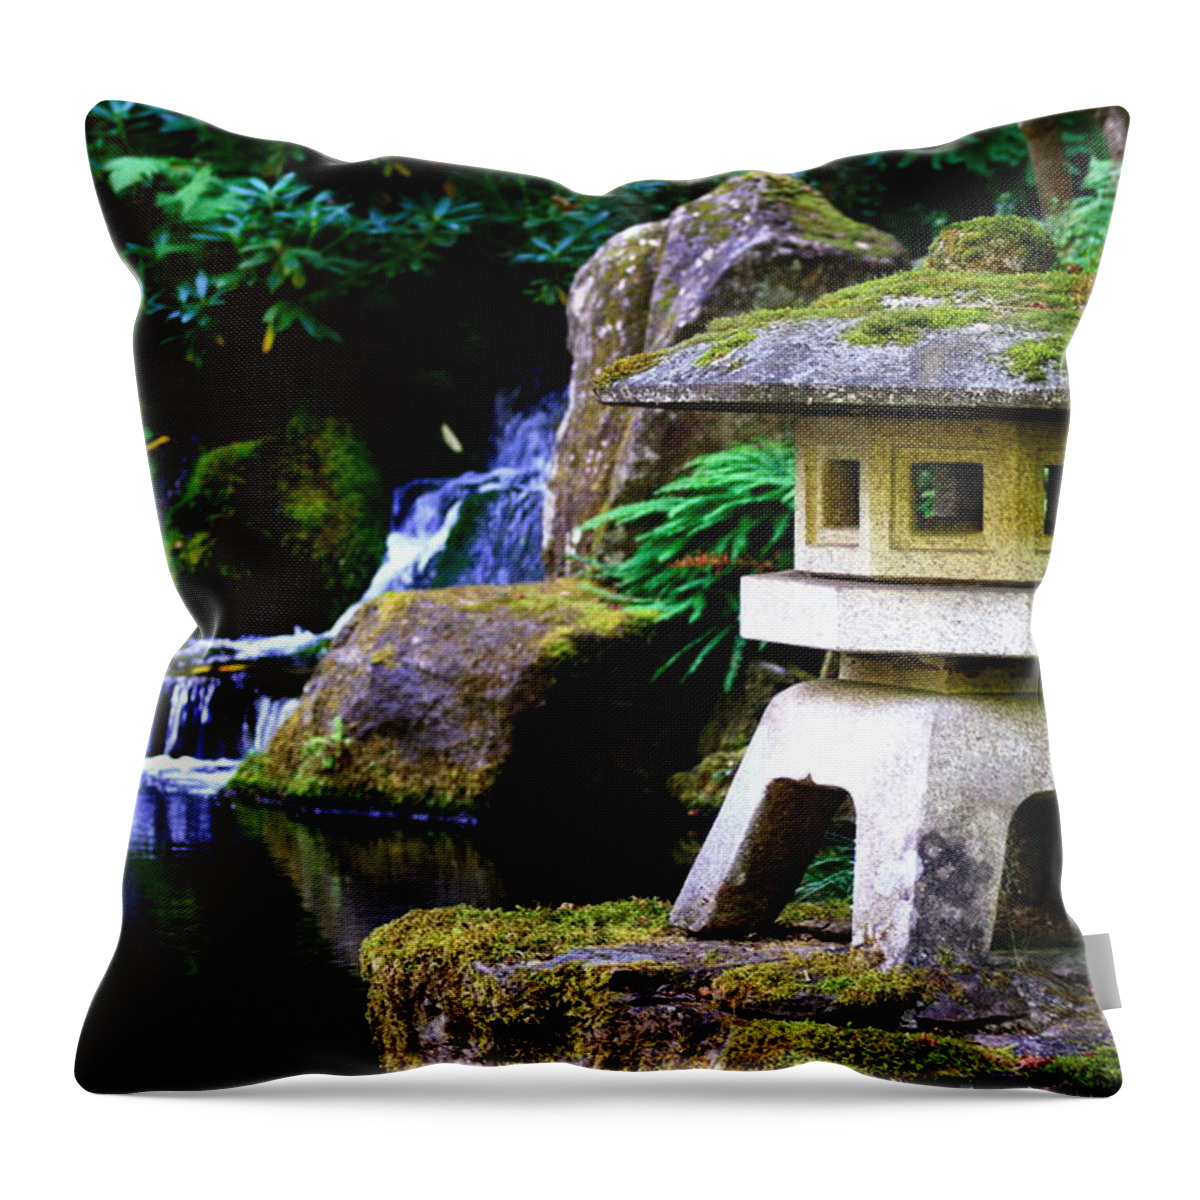 Tranquility Throw Pillow featuring the photograph Portland Japanese Garden by Massimo Ravera